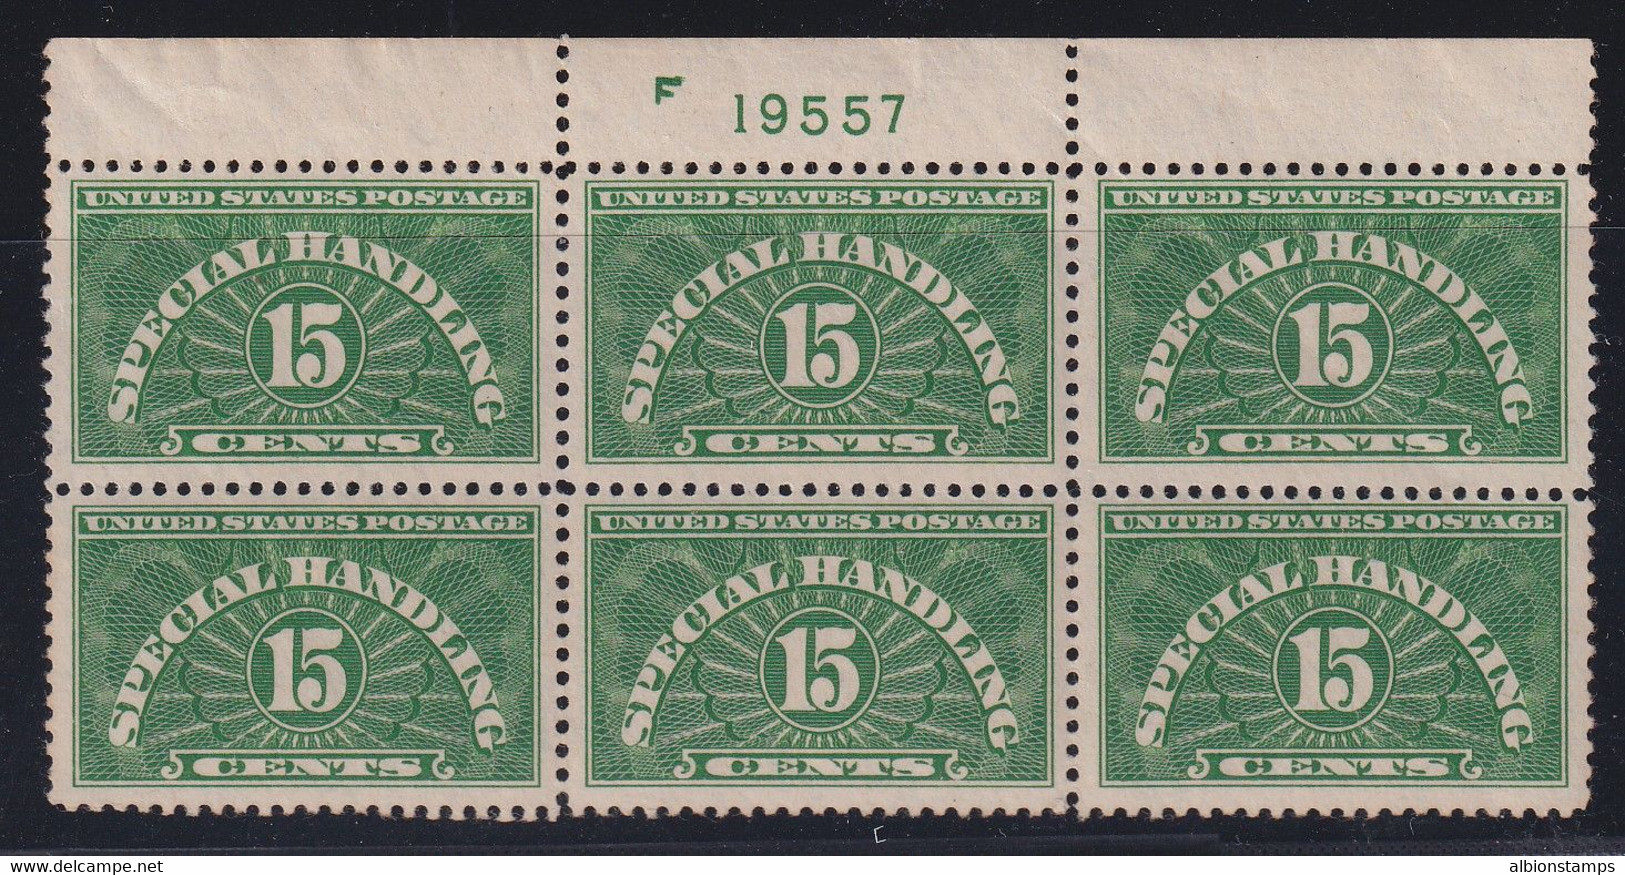 United States, Scott QE2a, MNH Plate Block Of Six (gum Skips) - Parcel Post & Special Handling